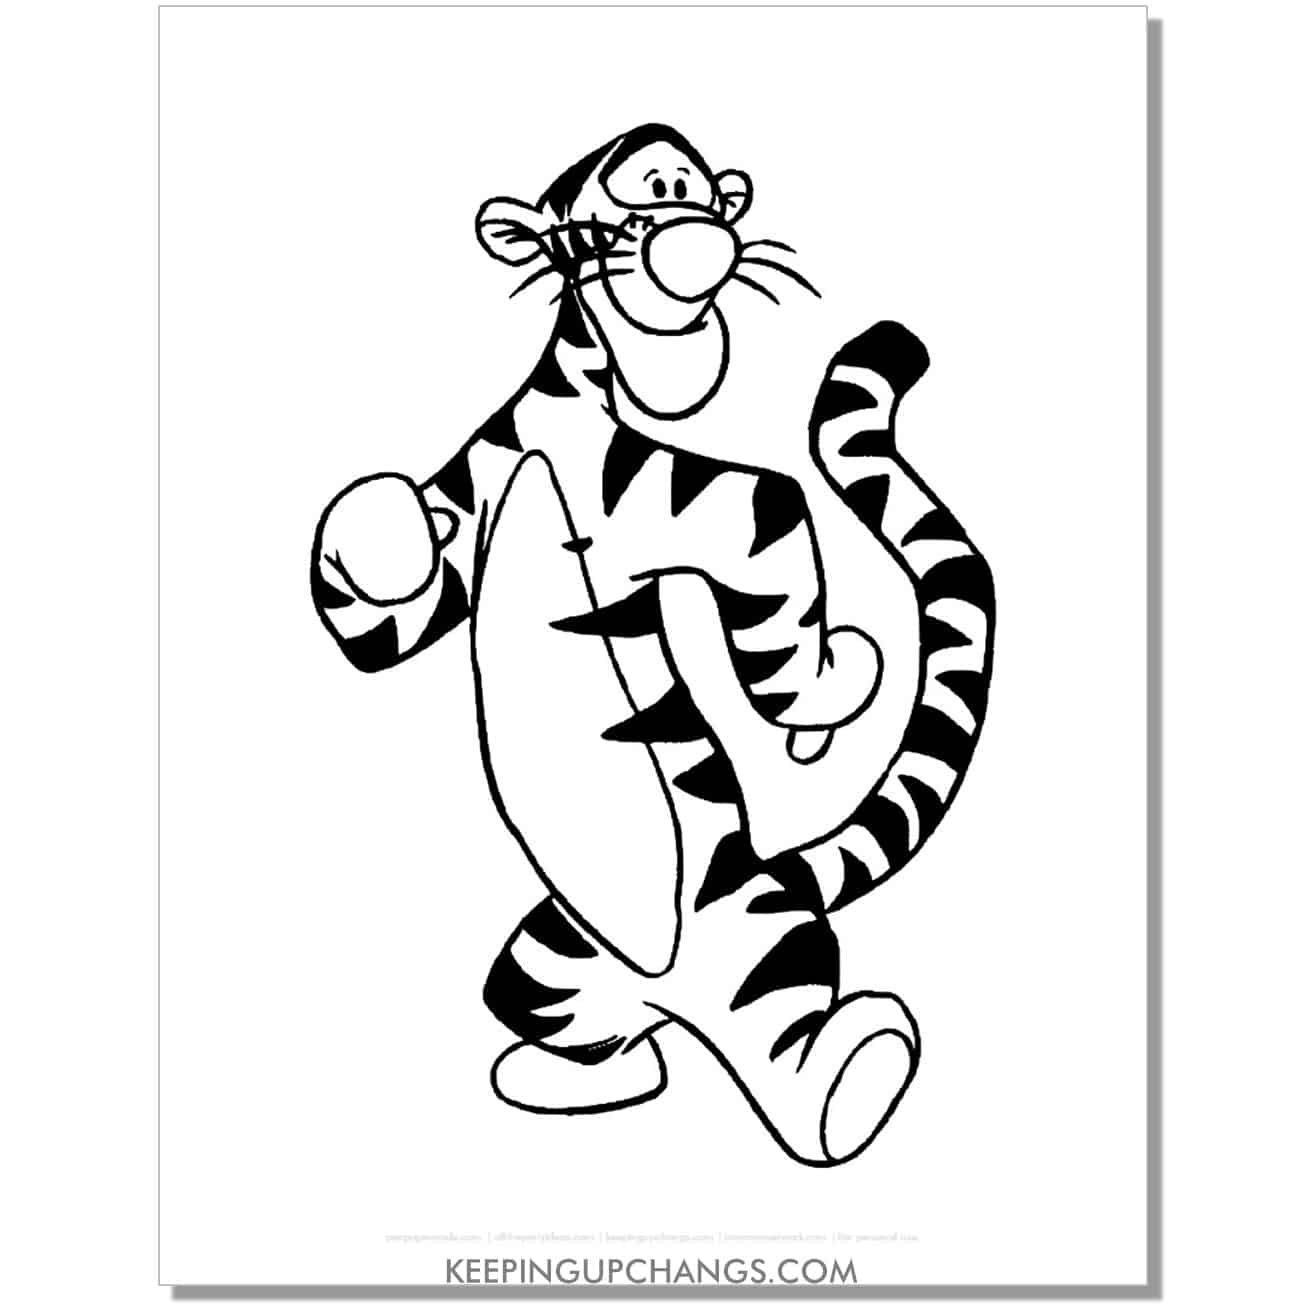 tigger does a side step coloring page, sheet.